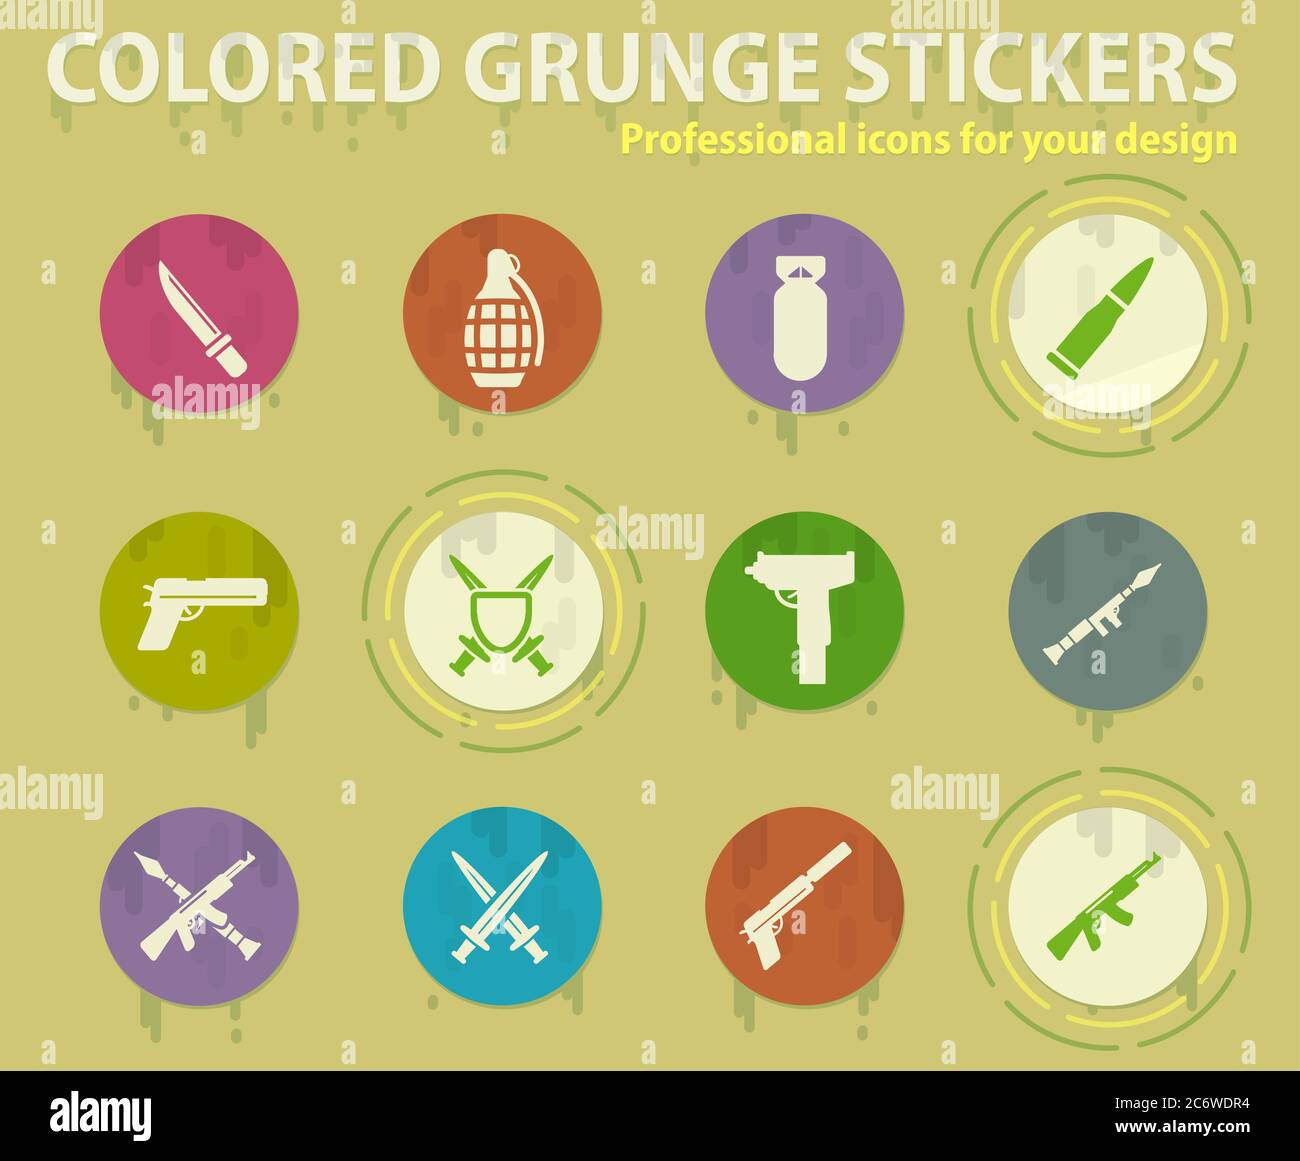 Weapon colored grunge icons Stock Vector